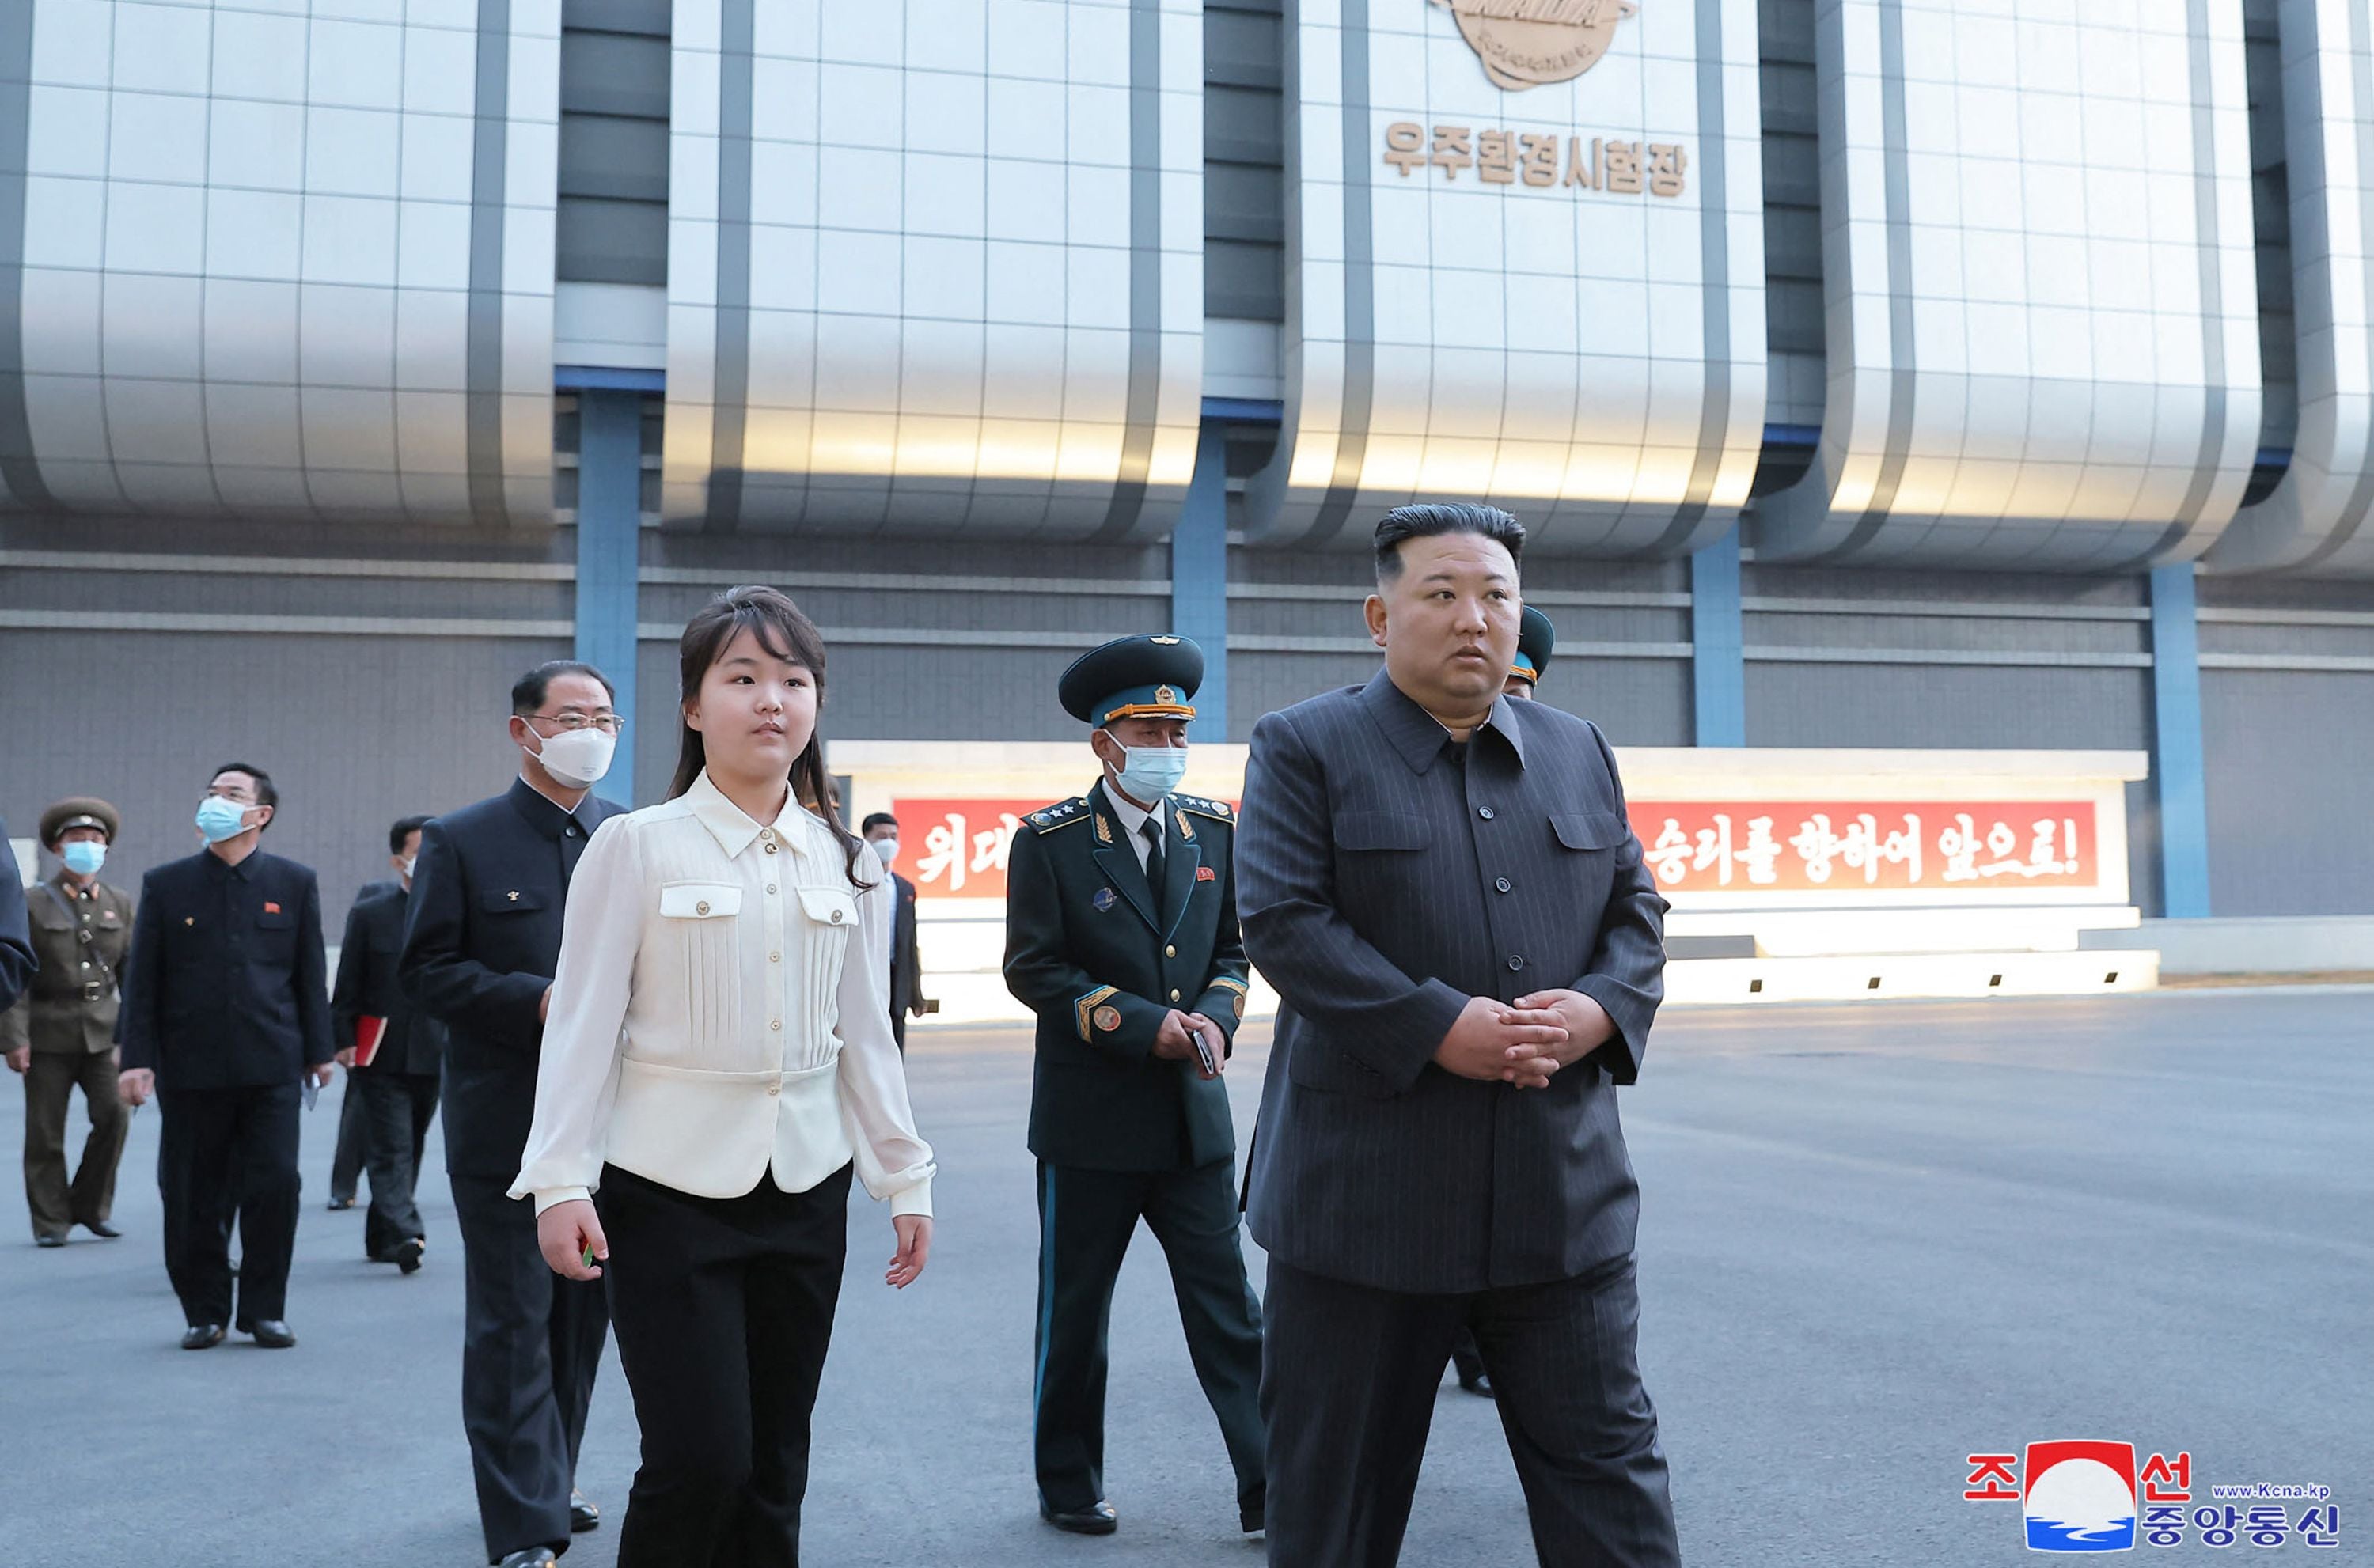 North Korean leader Kim Jong-un and his daughter inspecting the National Aerospace Development Administration